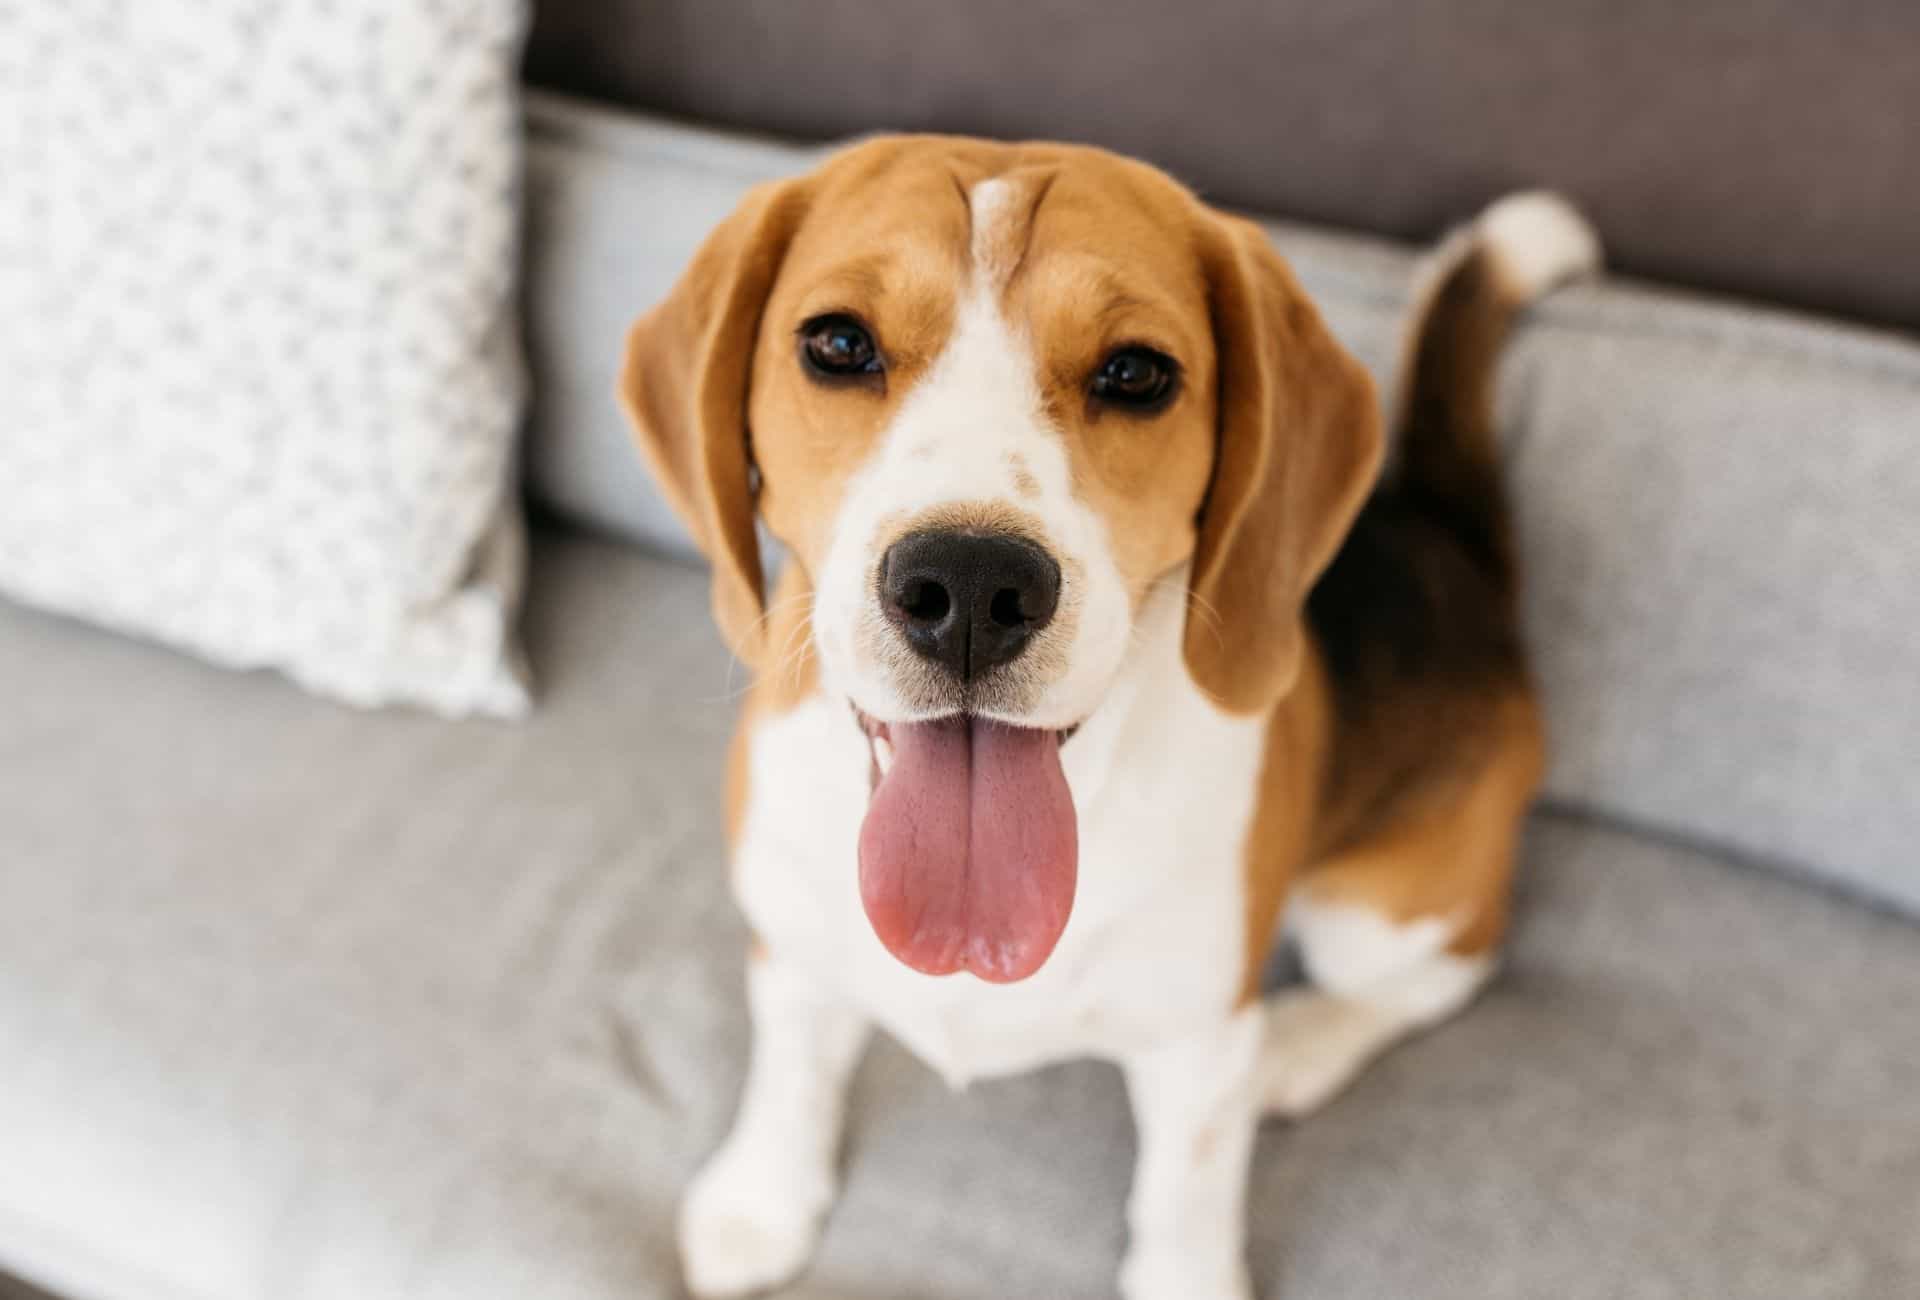 Adult Beagle with the tongue out sitting on a couch.